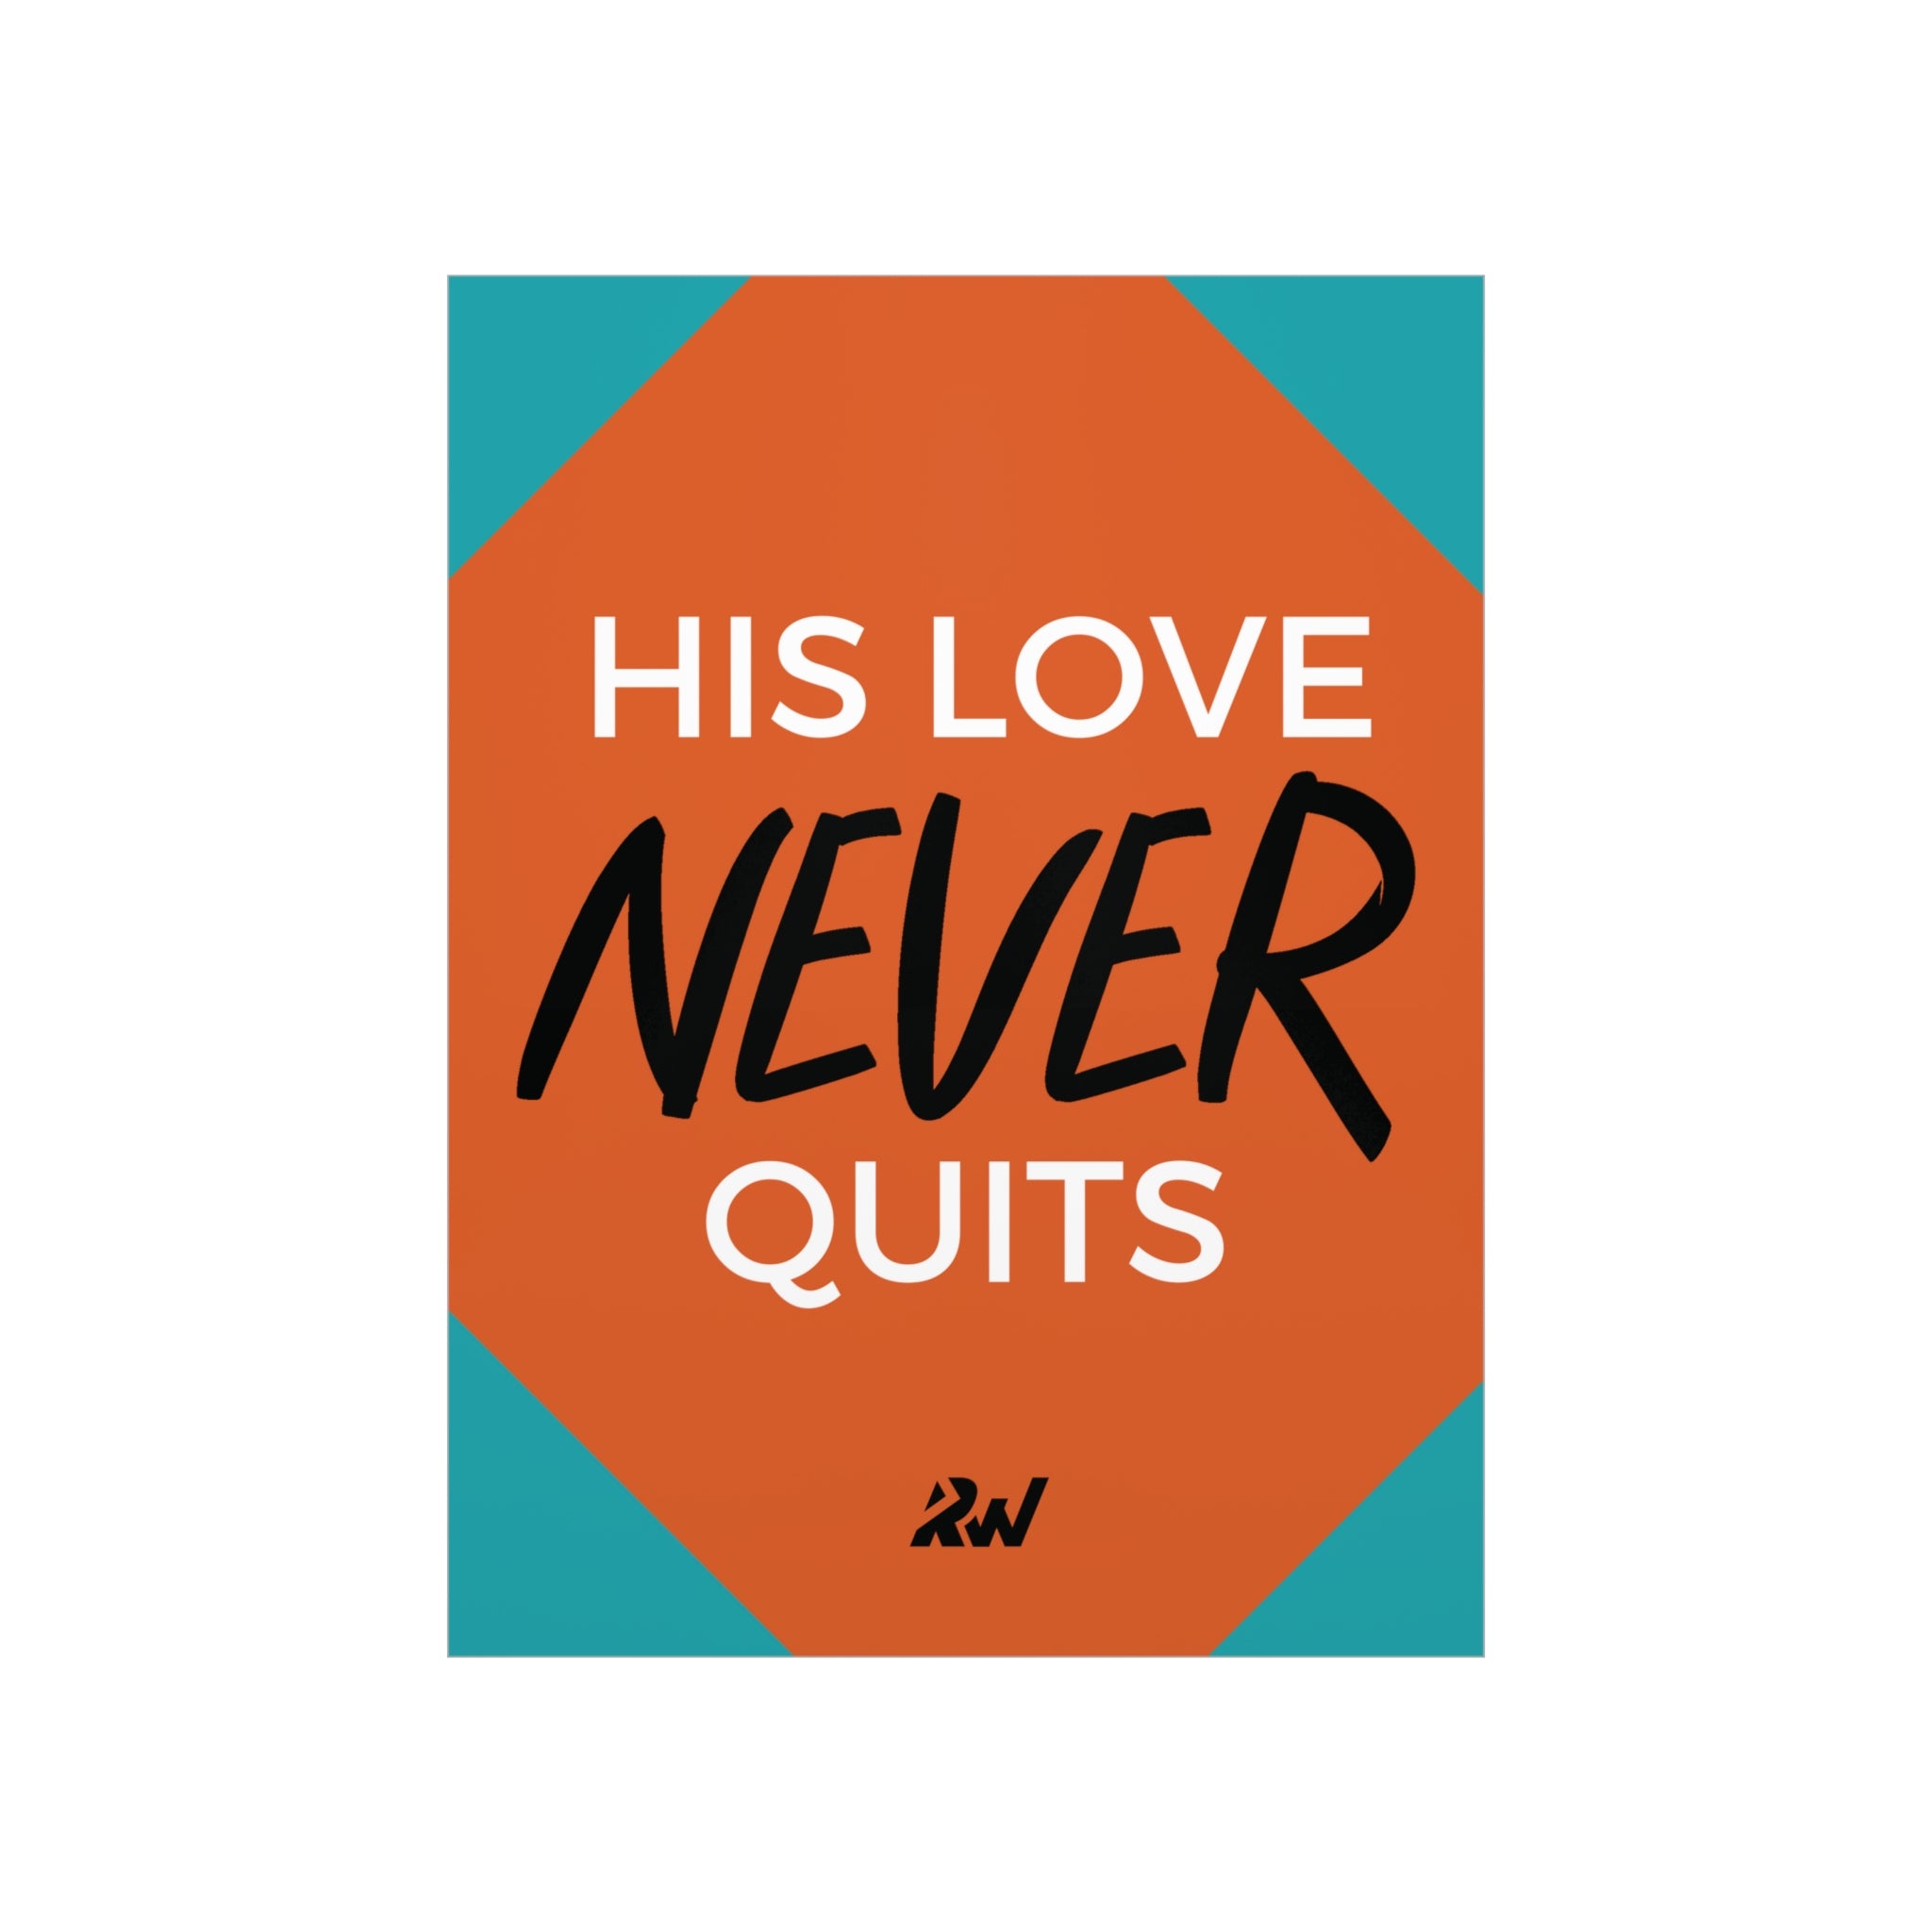 His Love Never Quits Poster